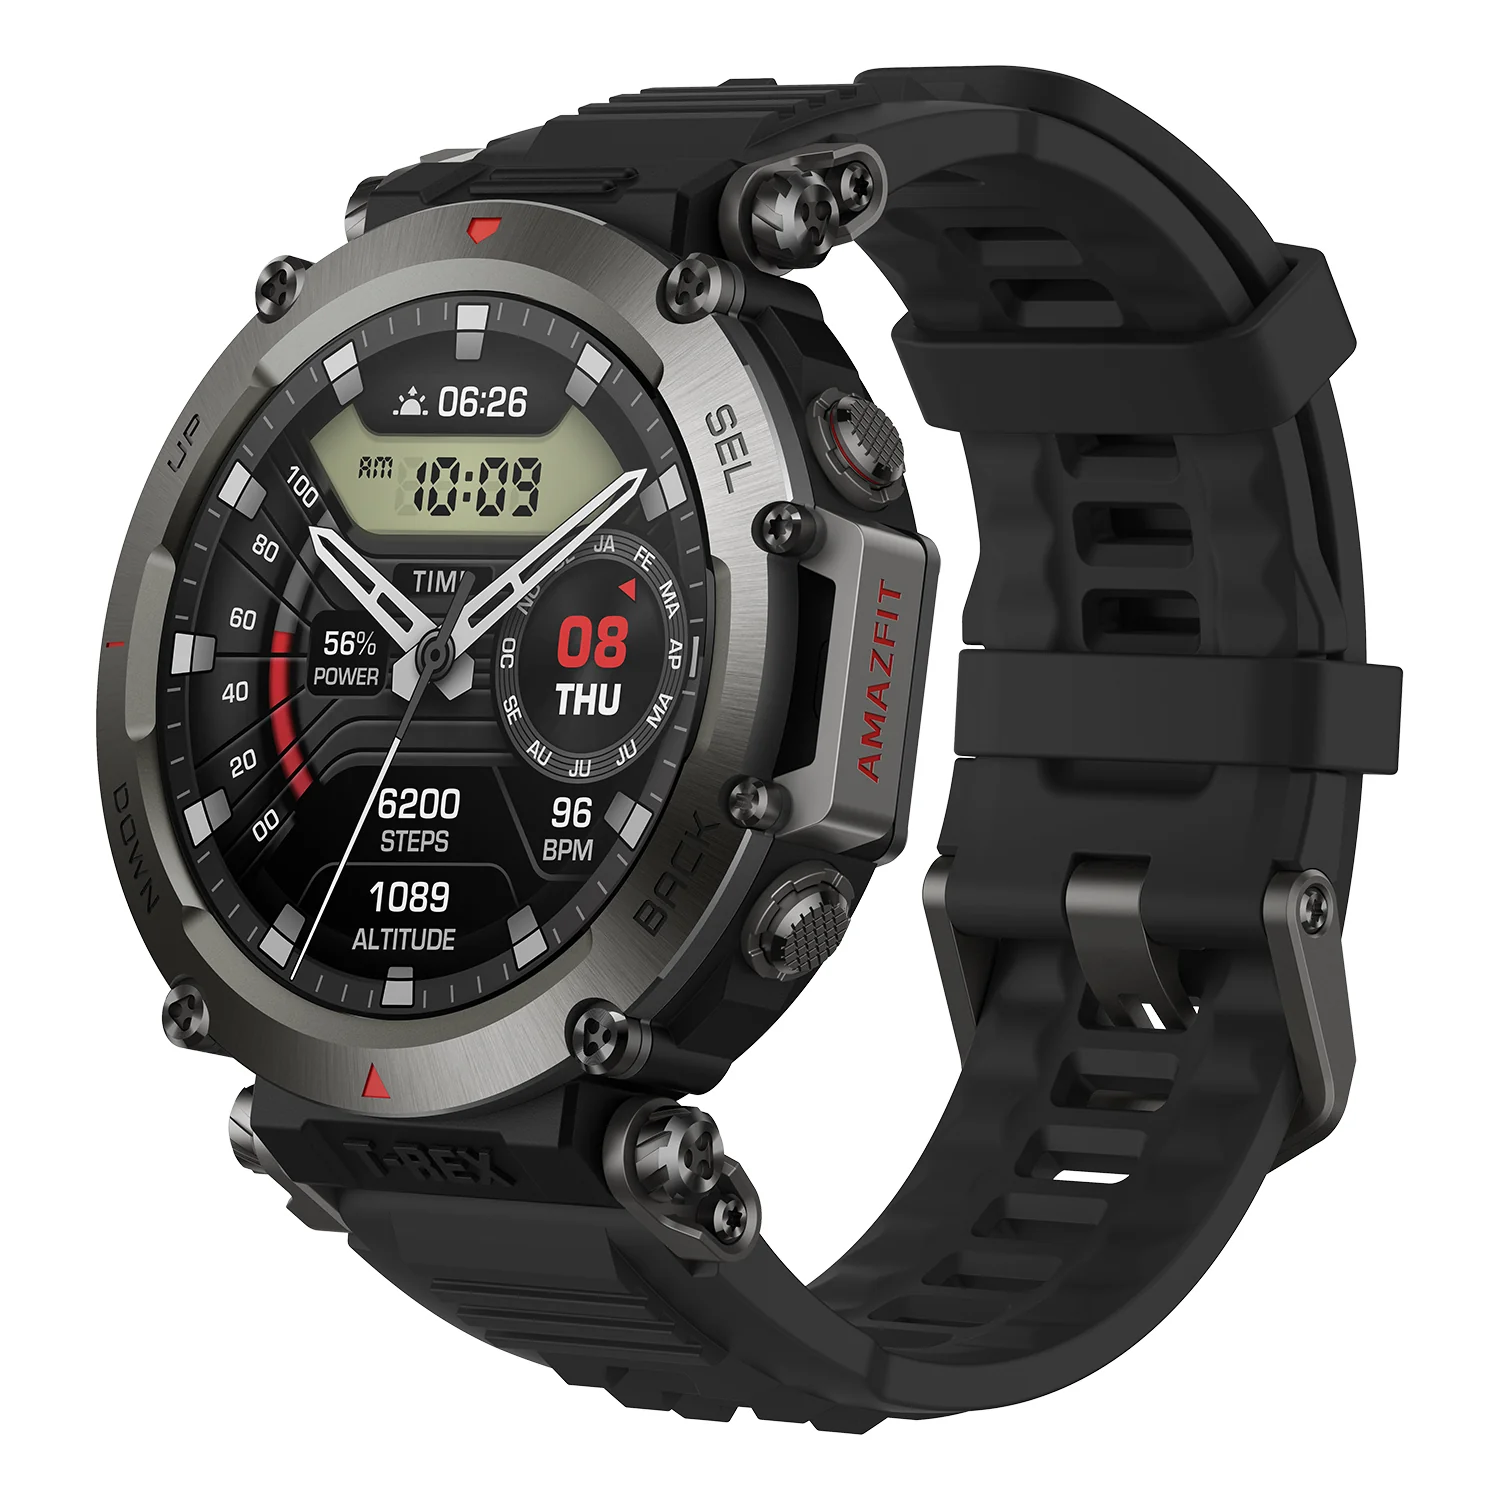 Amazfit T-Rex Ultra Smart Watch Dual-Band GPS Rugged Outdoor Military-Grade Smartwatch For Android IOS Phone, Abyss Black